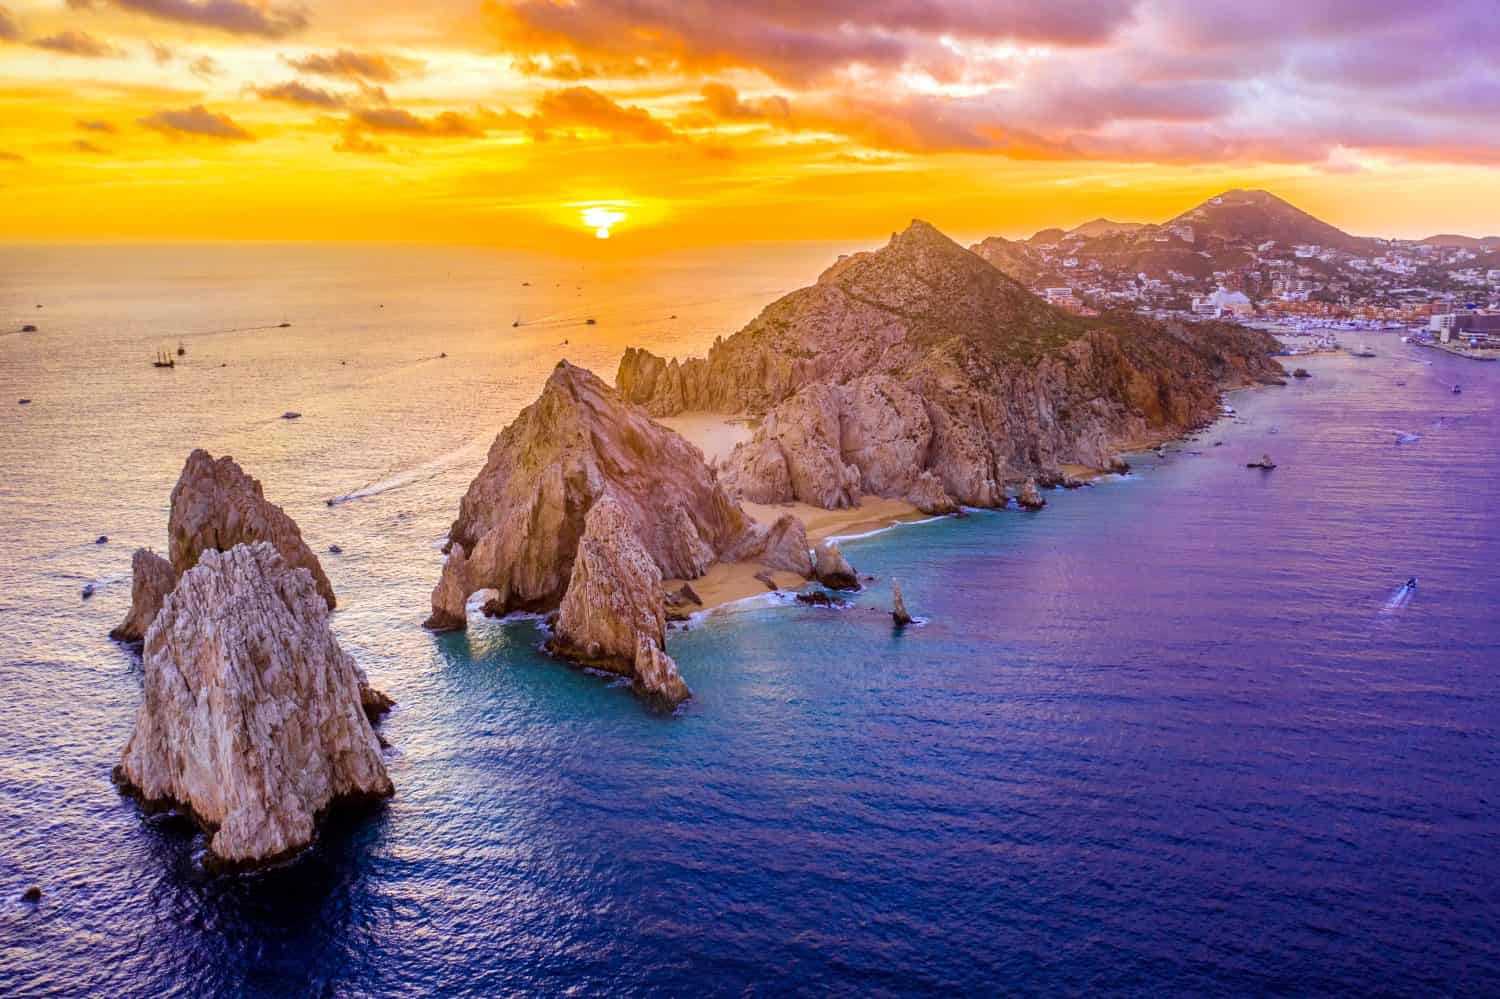 Aerial view of Land's End, Cabo San Lucas, Mexico at sunset, Baja California Sur, with the Cabo San Lucas marina in the background